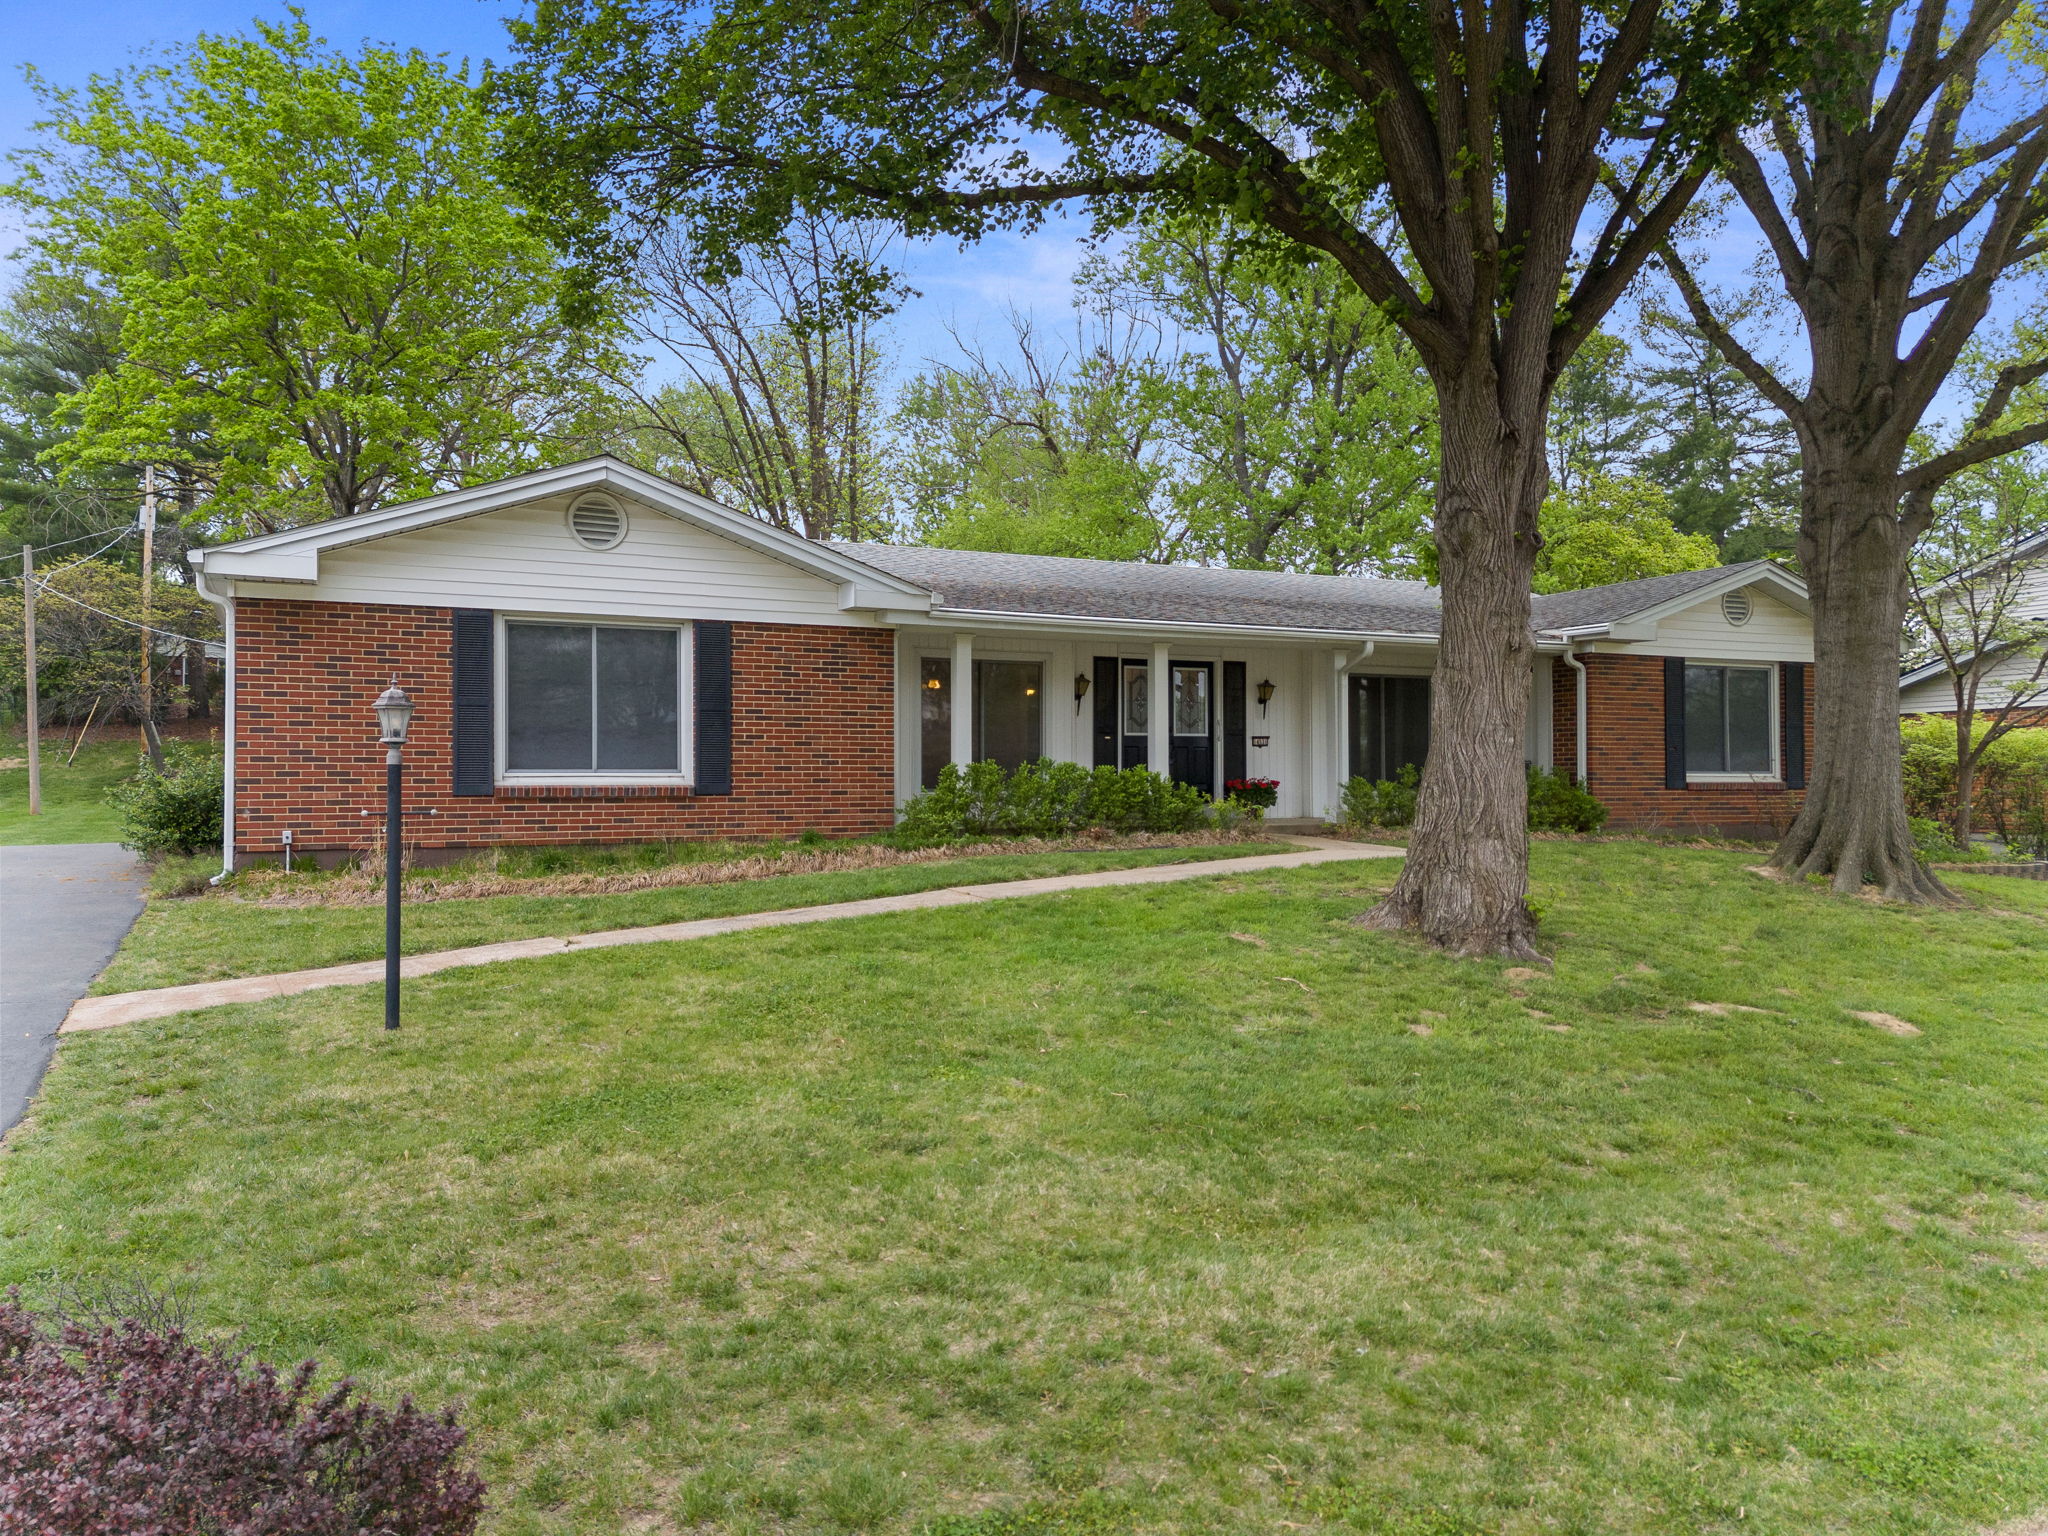 This handsome all-brick ranch is nestled in one of the most popular West County subdivisions. Walk to Green Trails Elementary, minutes from Faust Park.